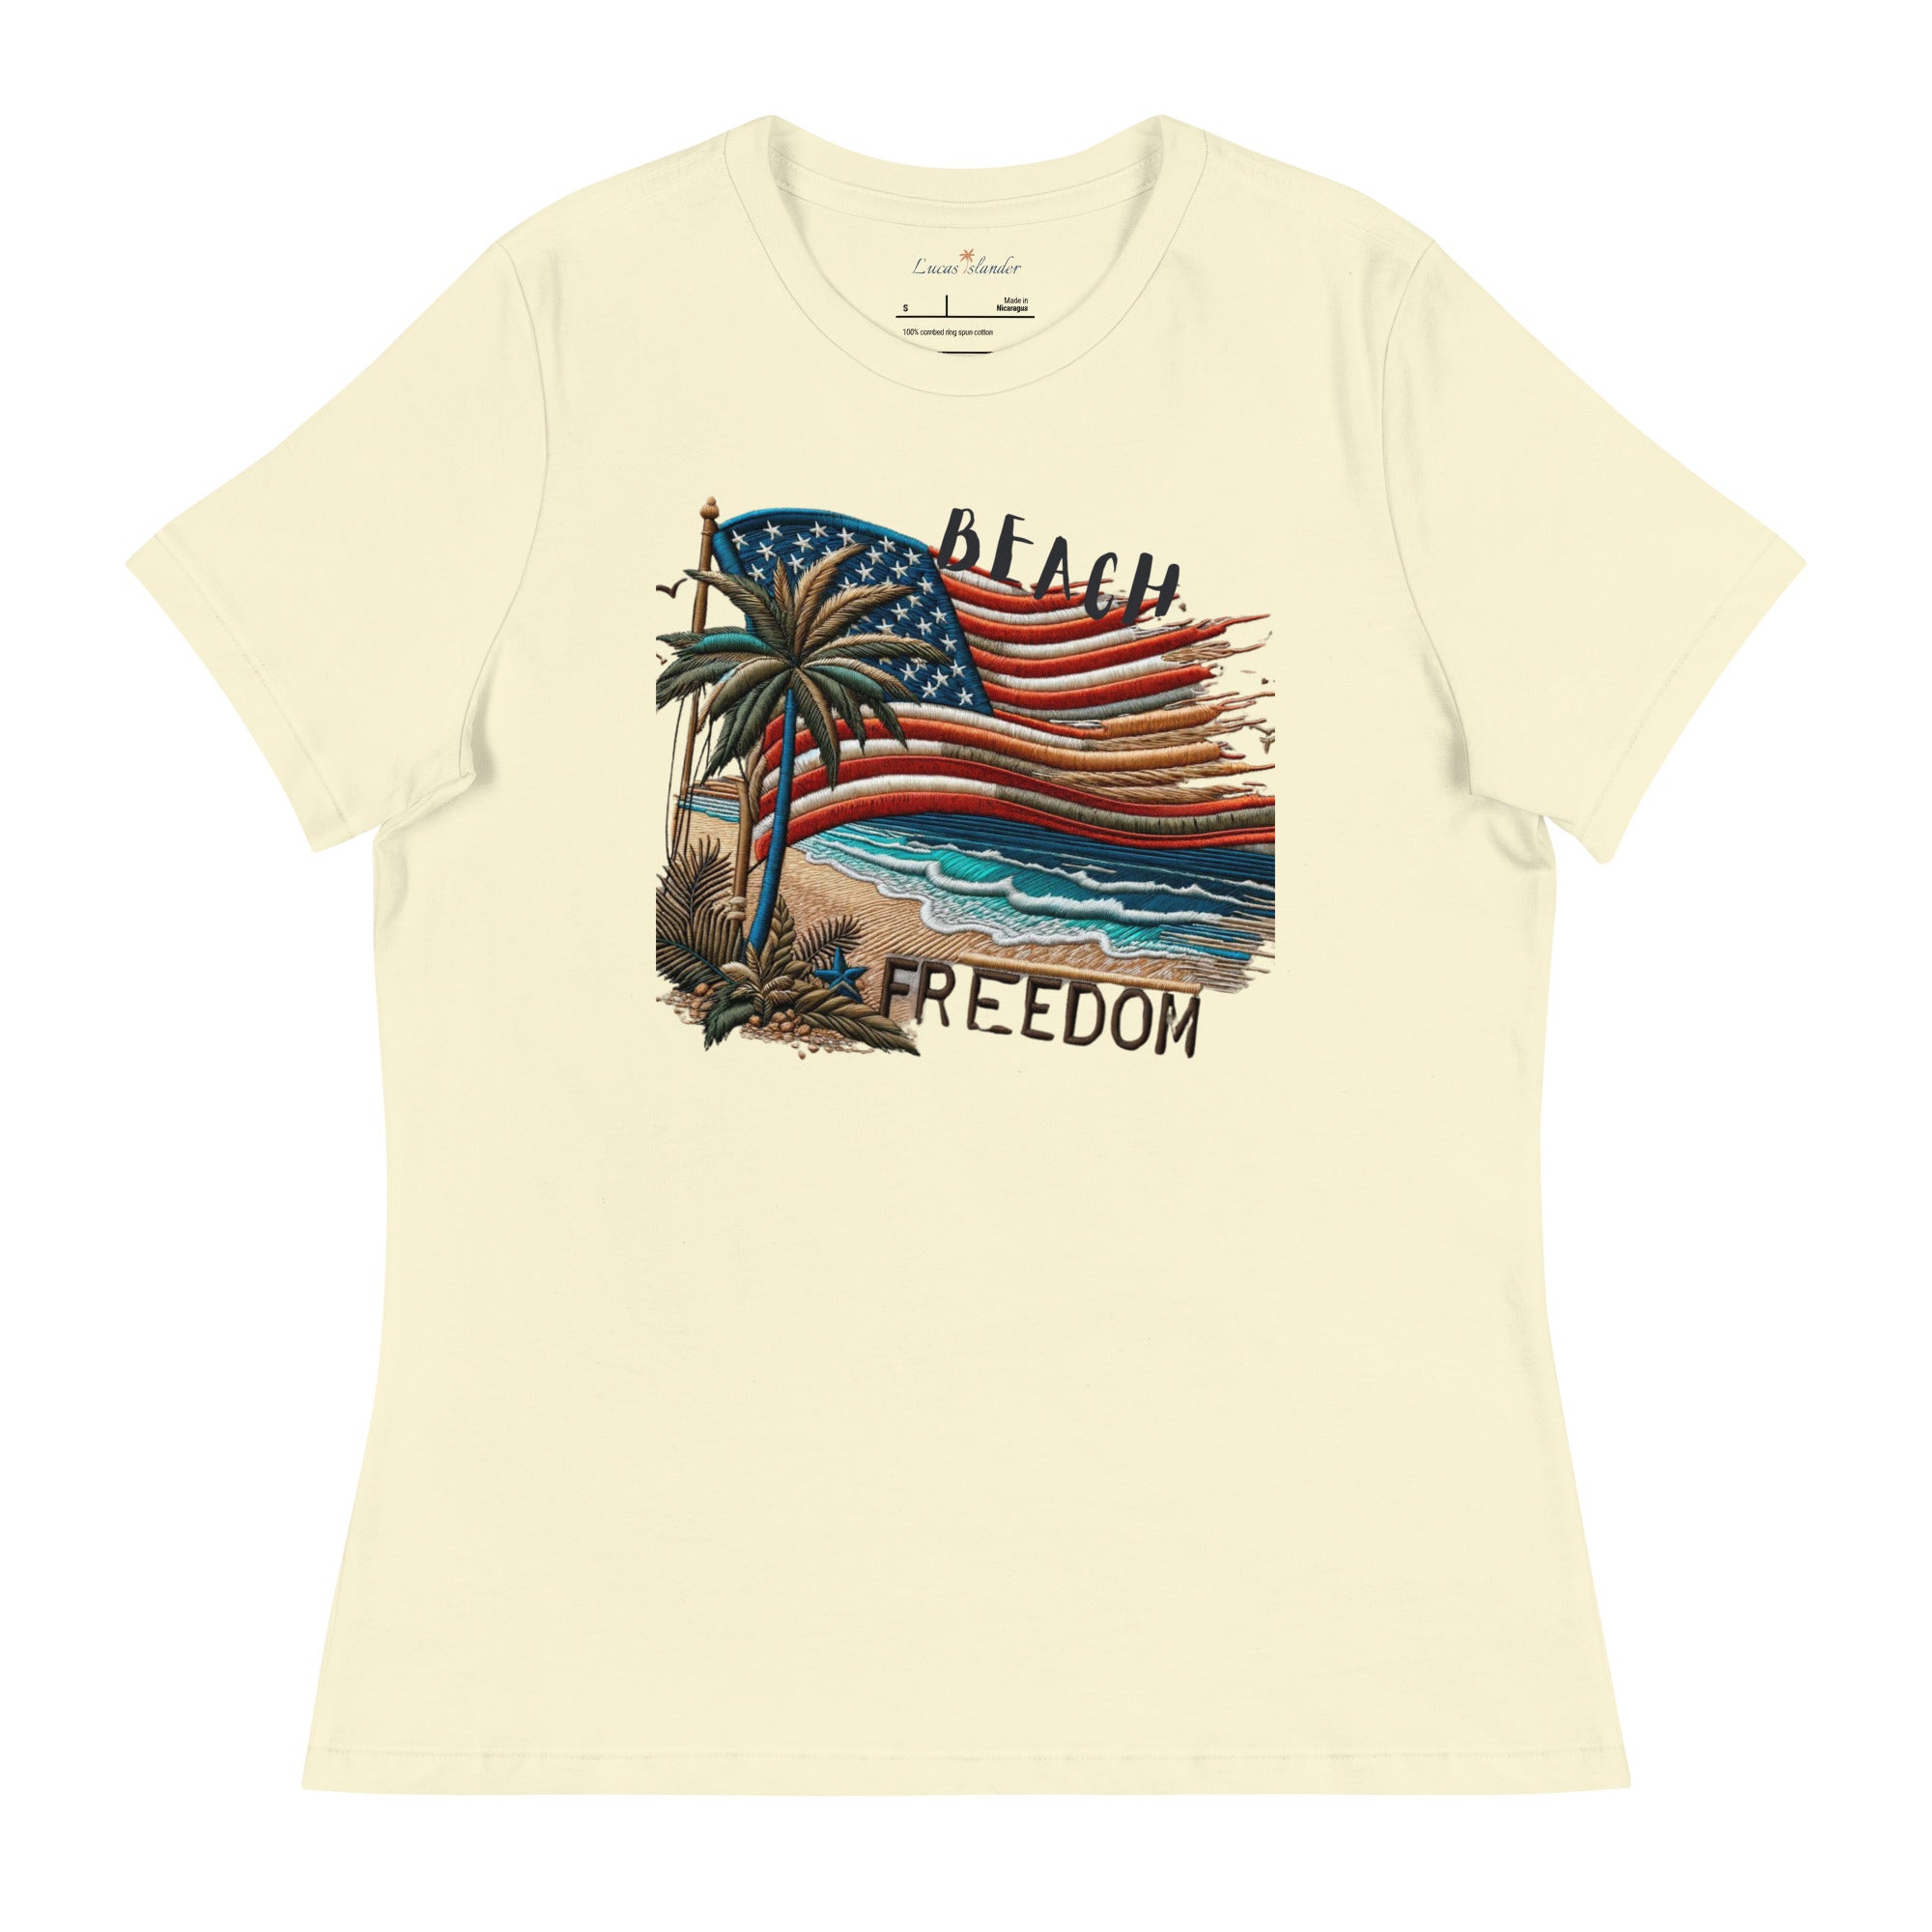 Experience Freedom and Style: American Flag Beach Freedom T-shirt by Lucas Islander Relaxed Fit